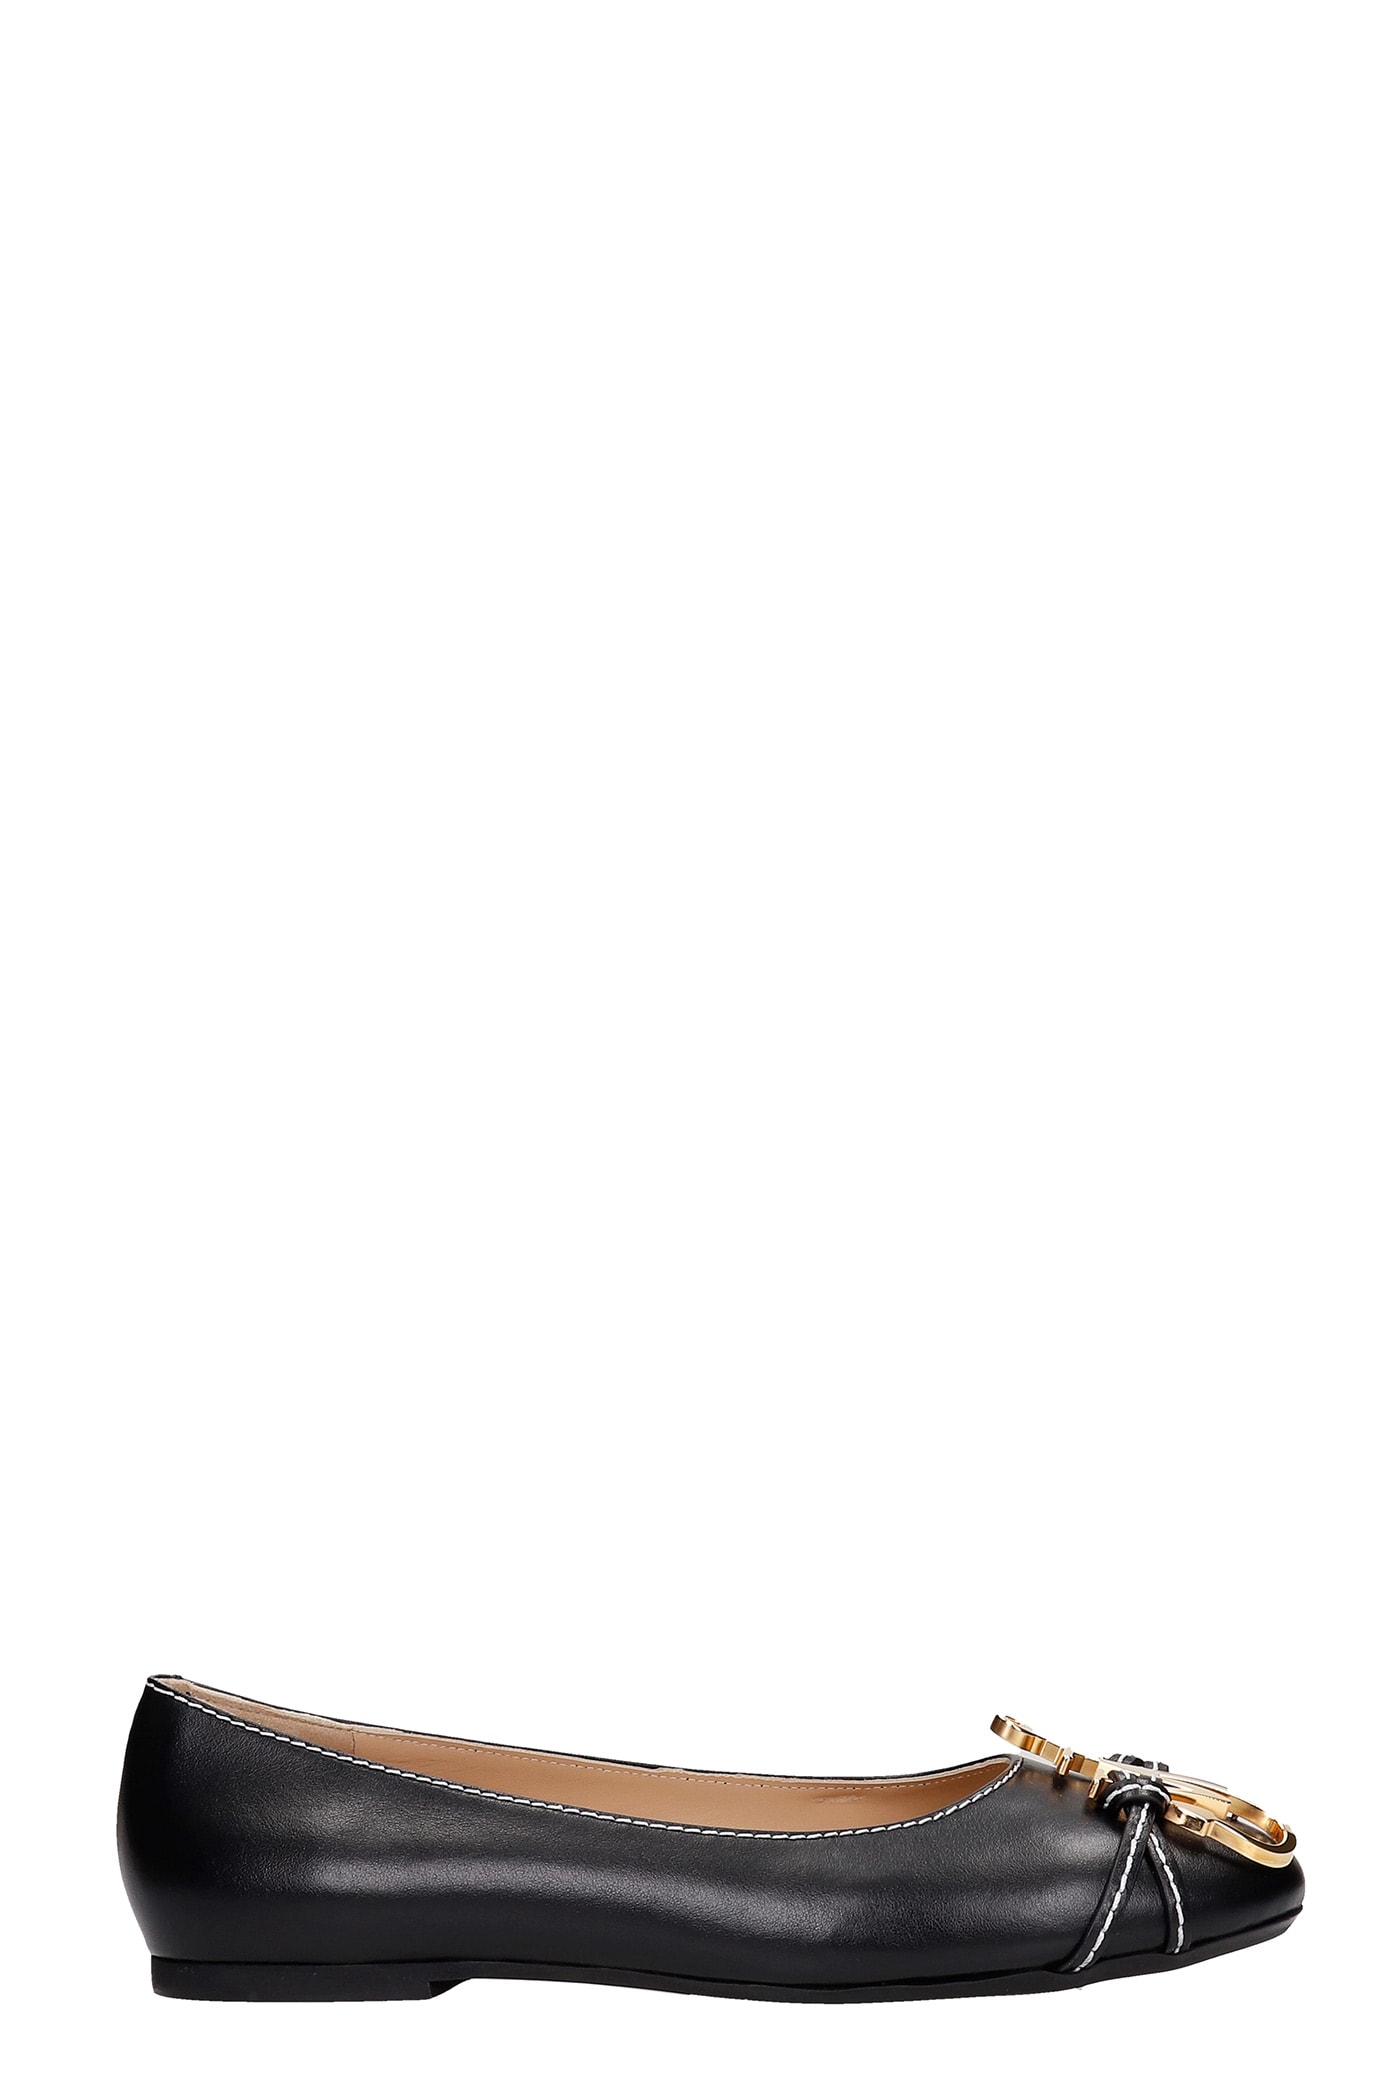 J.W. Anderson Ballet Flats In Black Leather